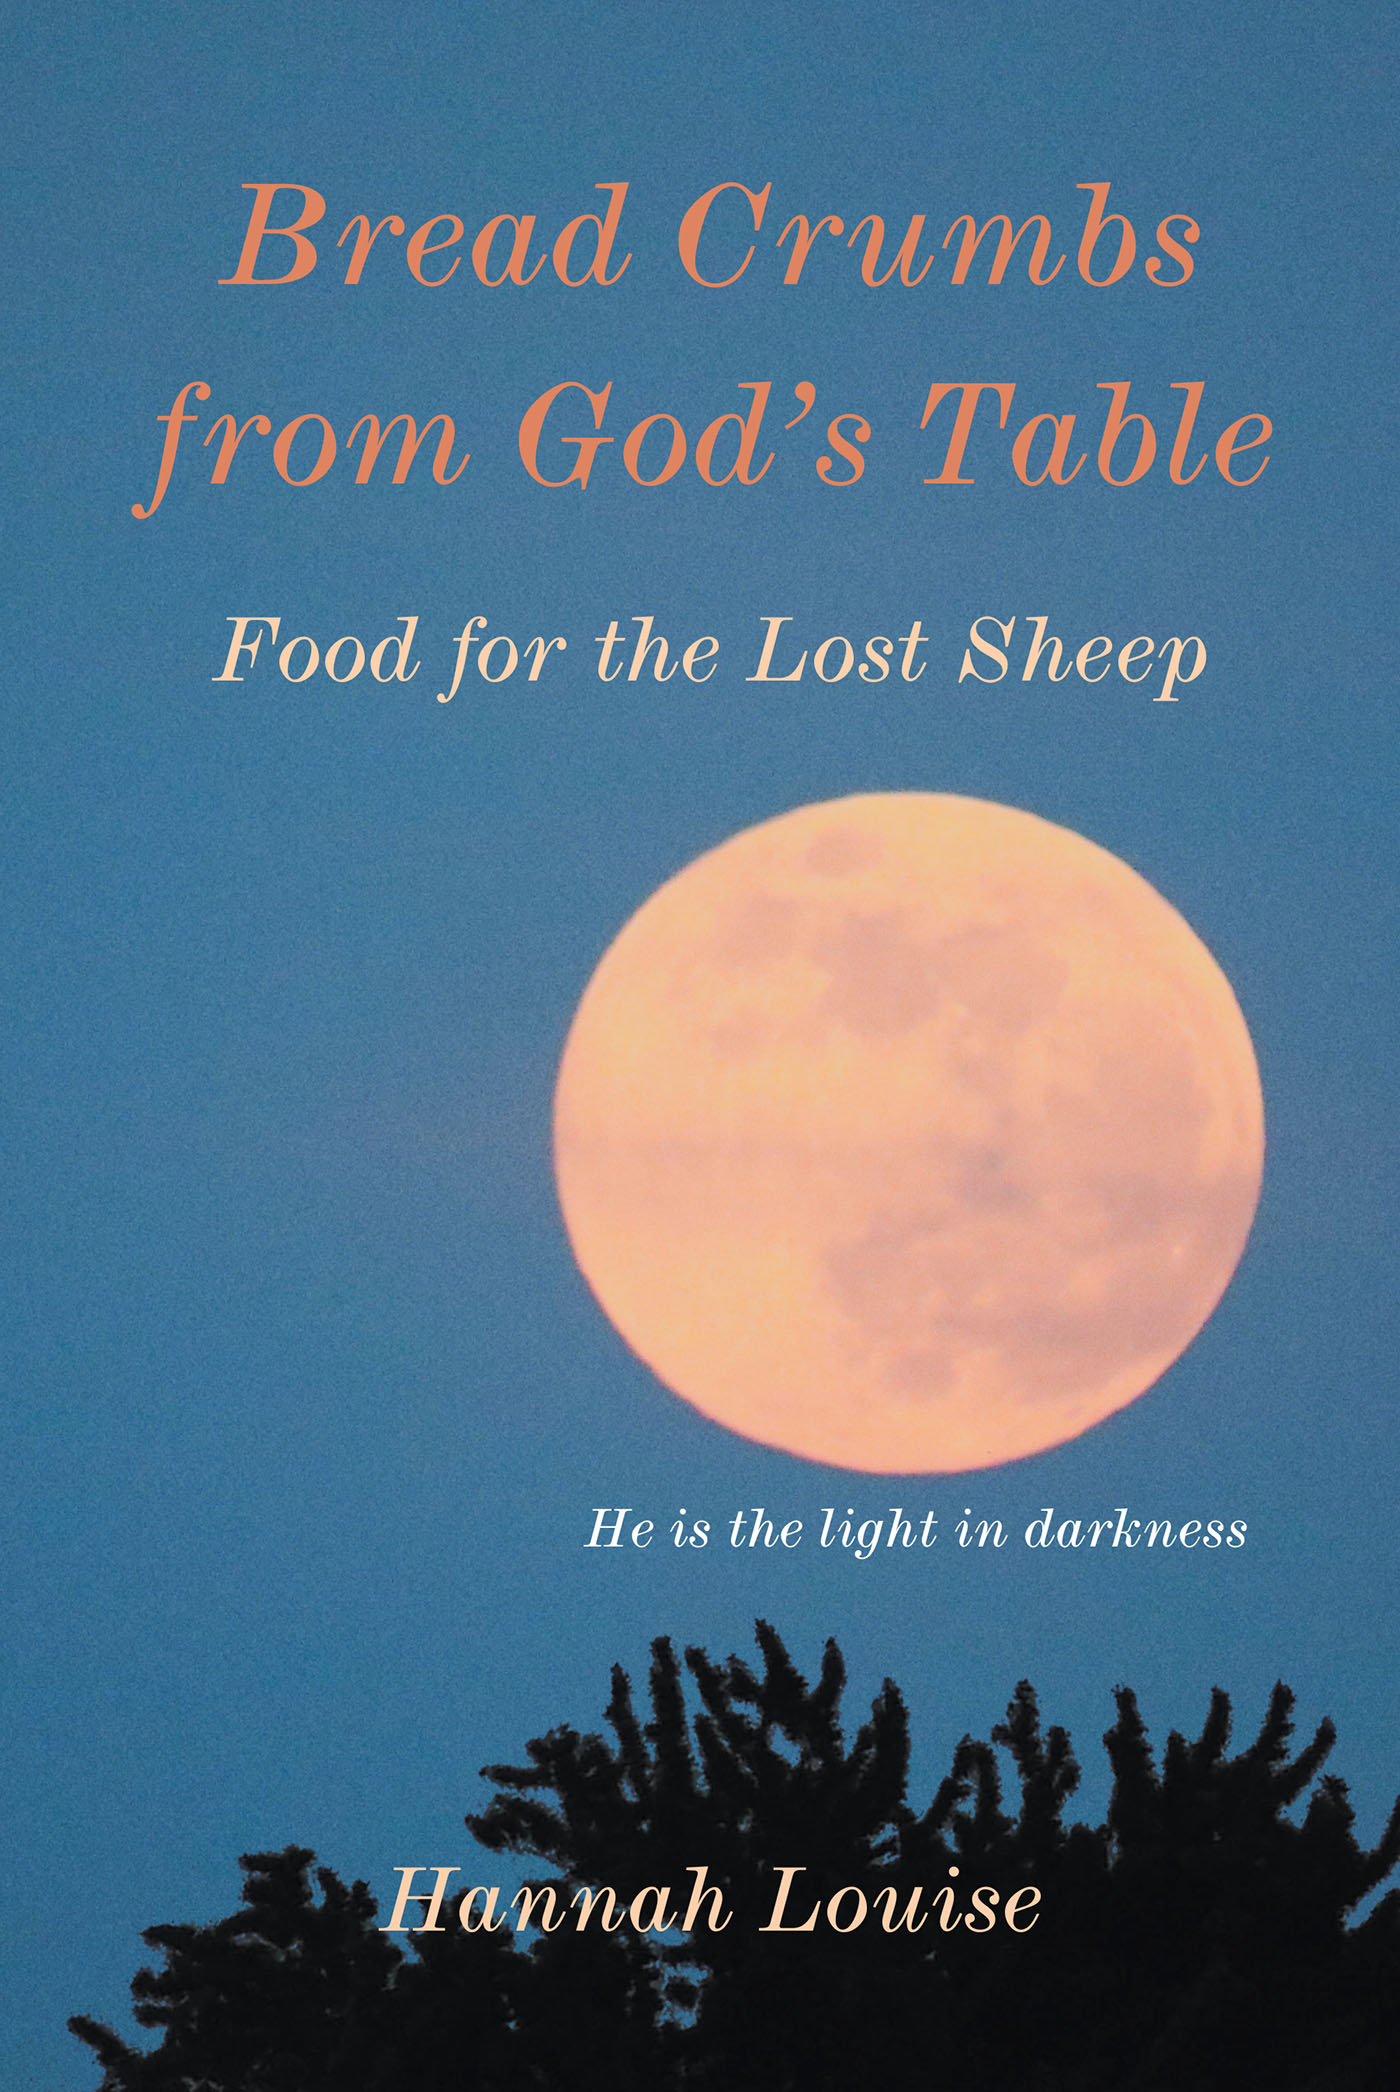 Hannah Louise’s Newly Released "Bread Crumbs from God’s Table" is an Enjoyable Selection of Key Scripture Meant to Inspire and Empower